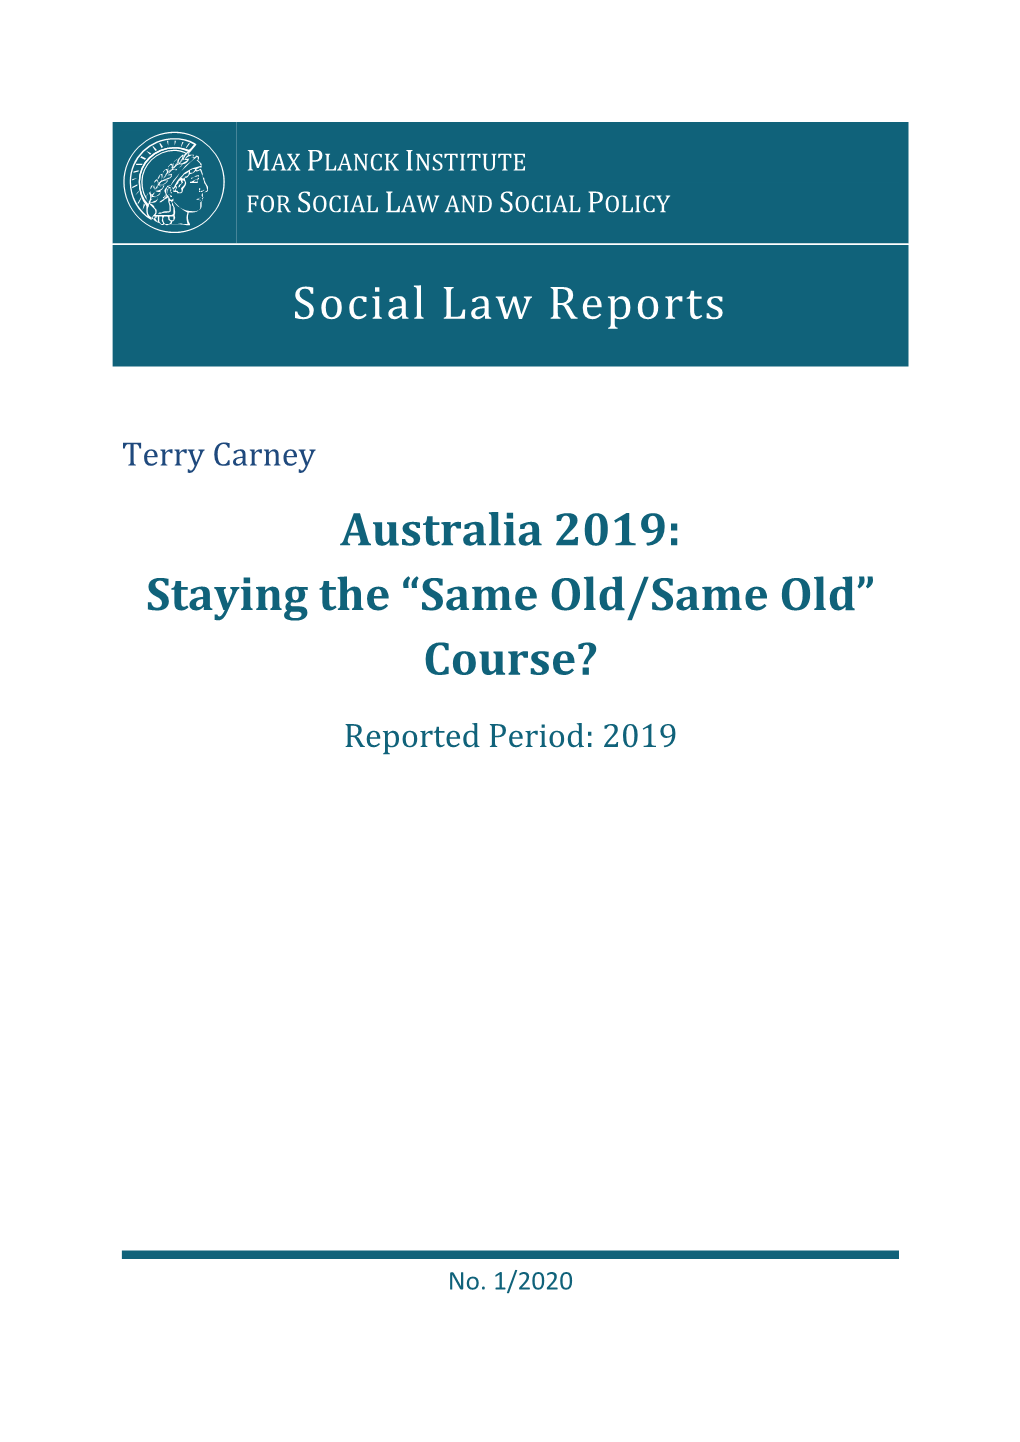 Social Law Reports Australia 2019: Staying the “Same Old/Same Old